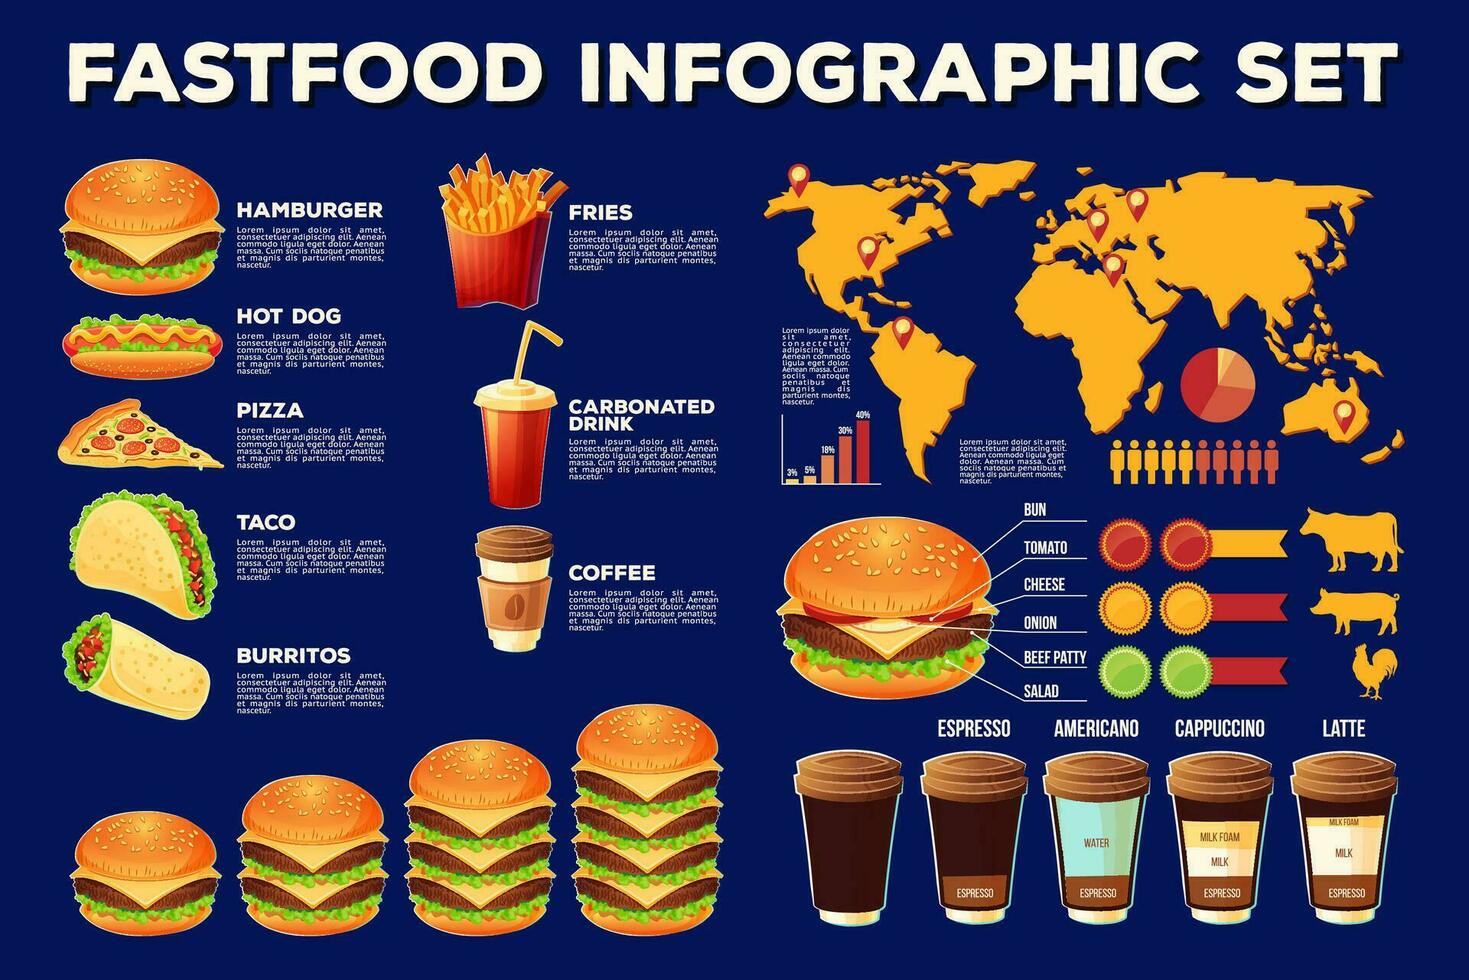 Fast food infographic set vector